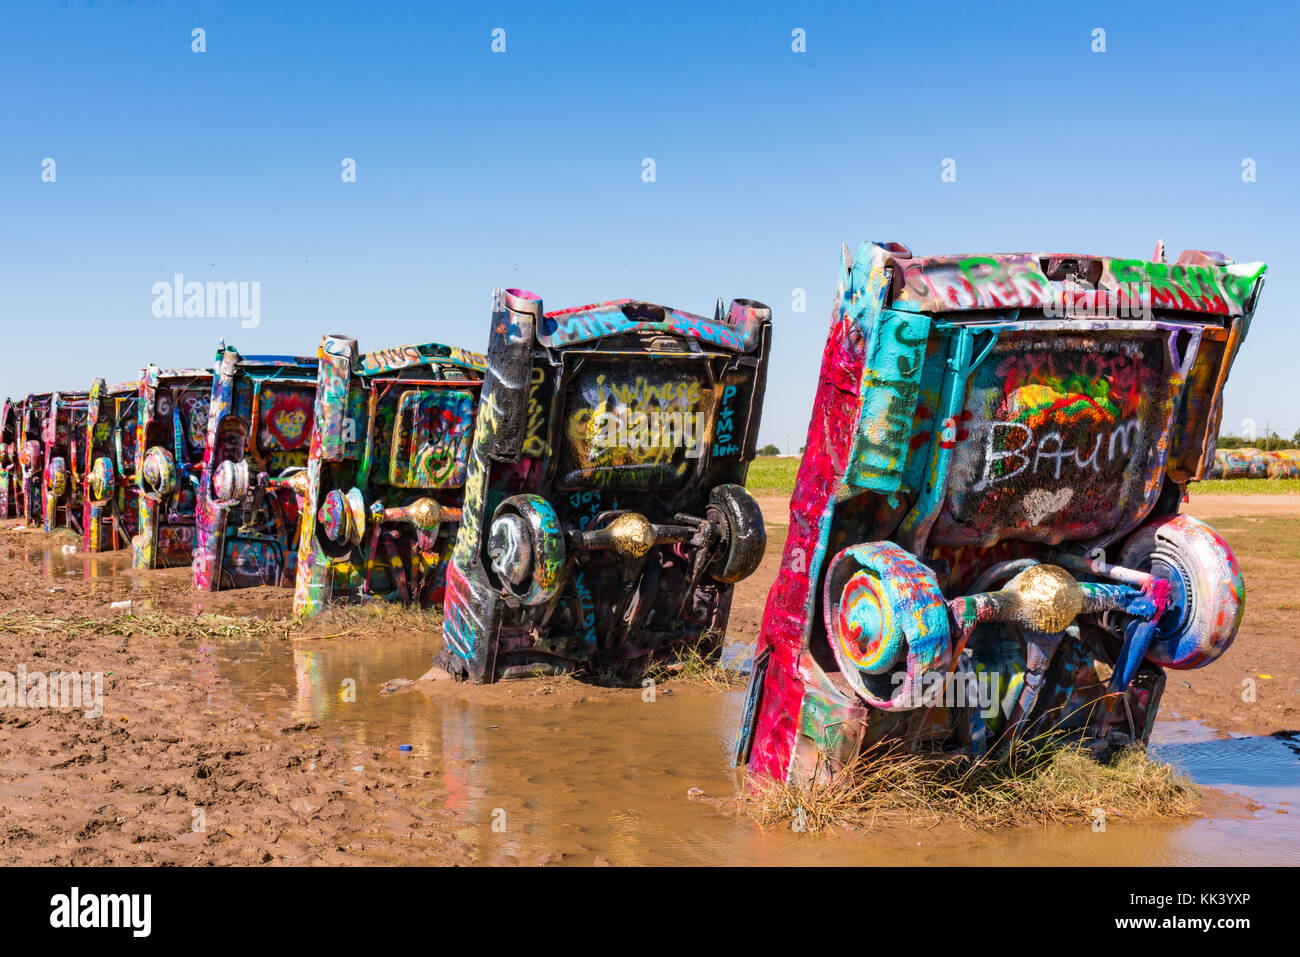 AMARILLO, TX-OCTOBER 12: Old Cadillac cars burried at the famous Cadillac Ranch Ranch along historic Route 66 near Amarillo, TX on October 12, 2017 Stock Photo